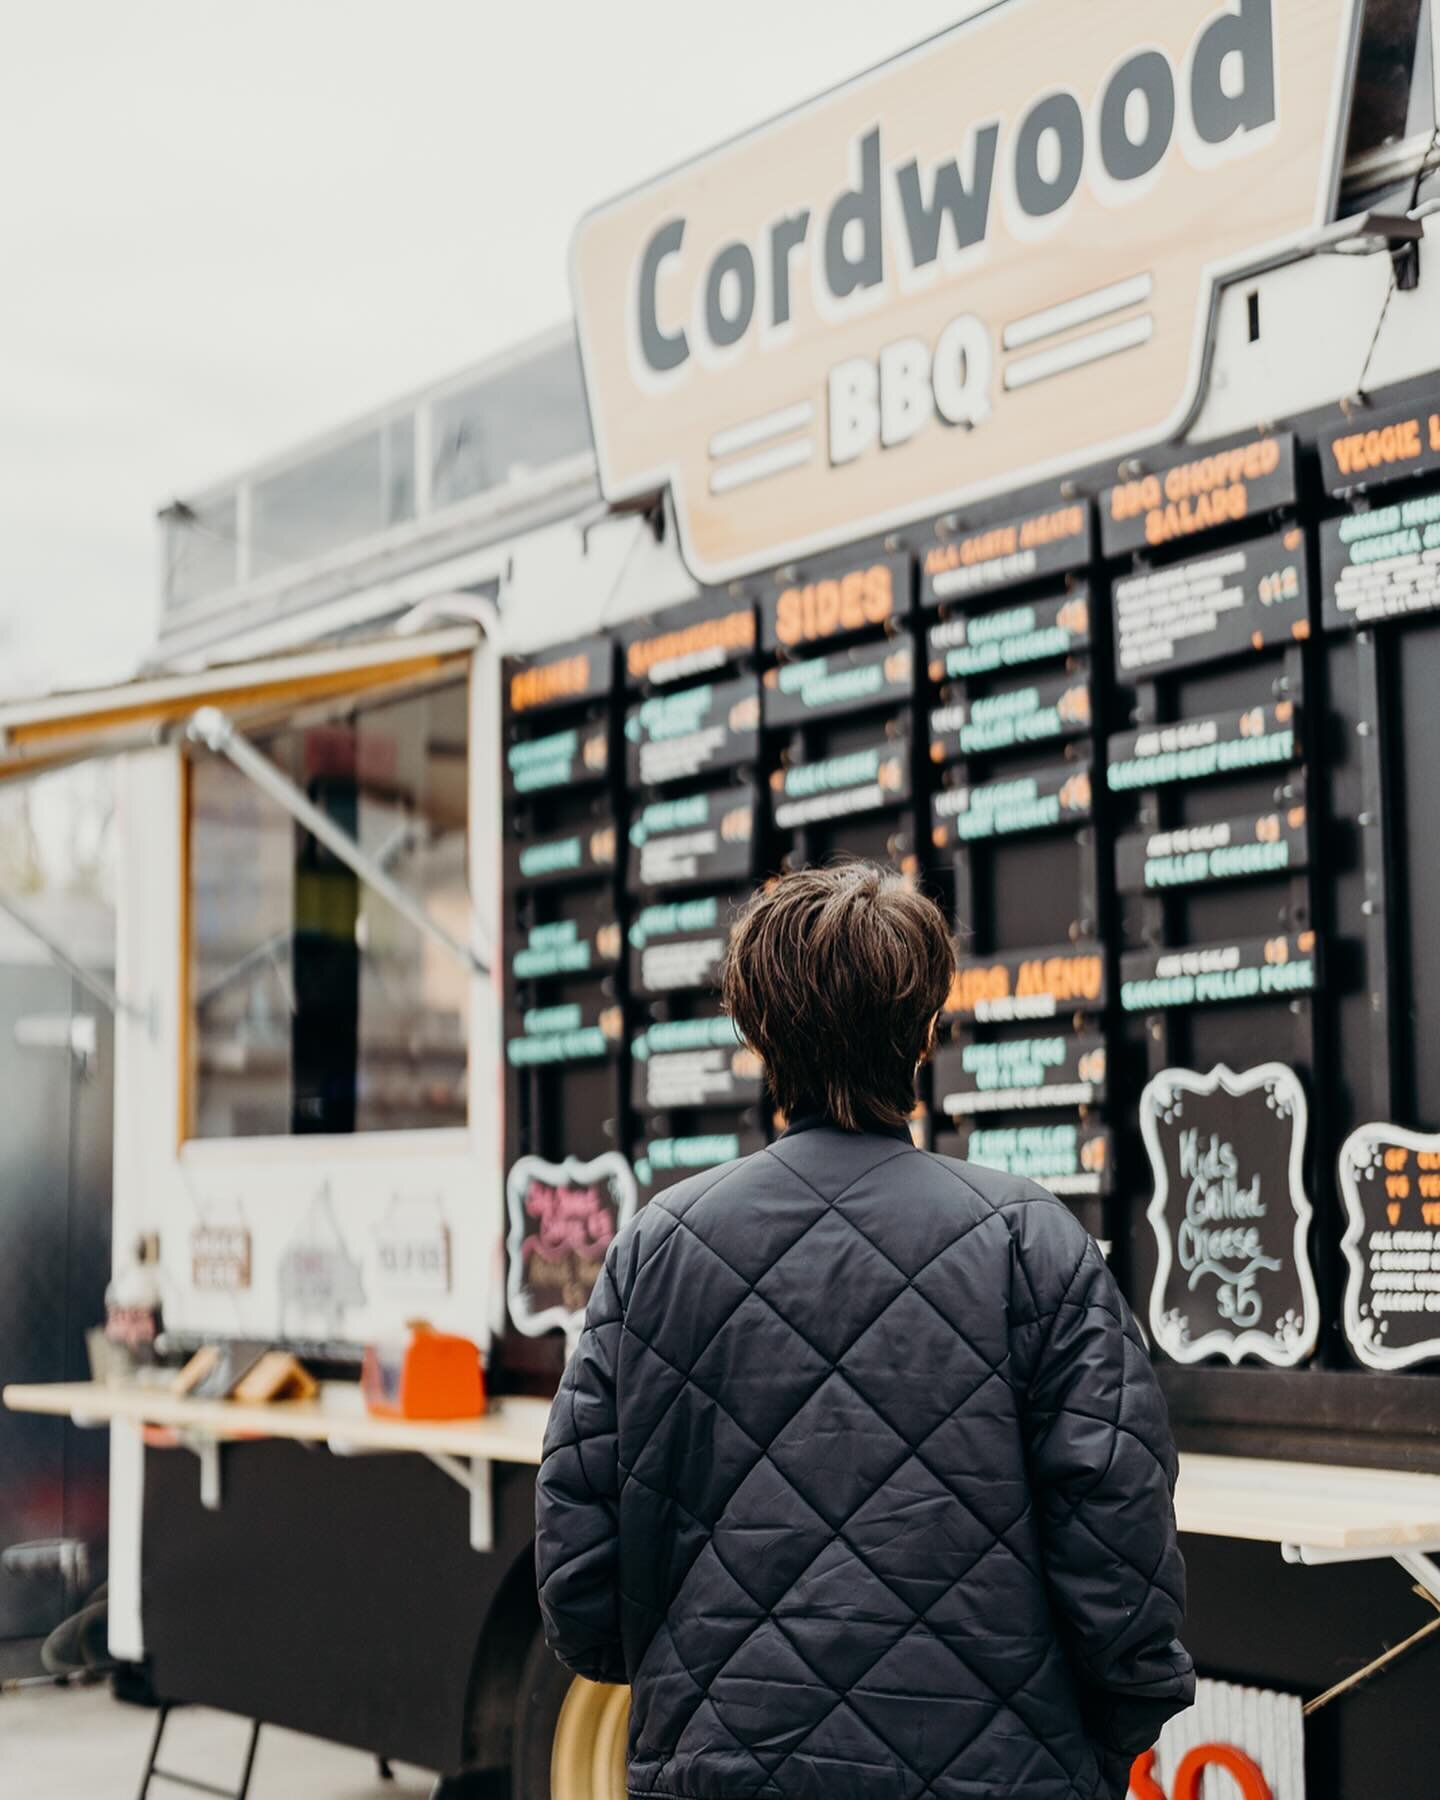 Food Truck Announcement 📢
Welcome back to the lot Cordwood BBQ